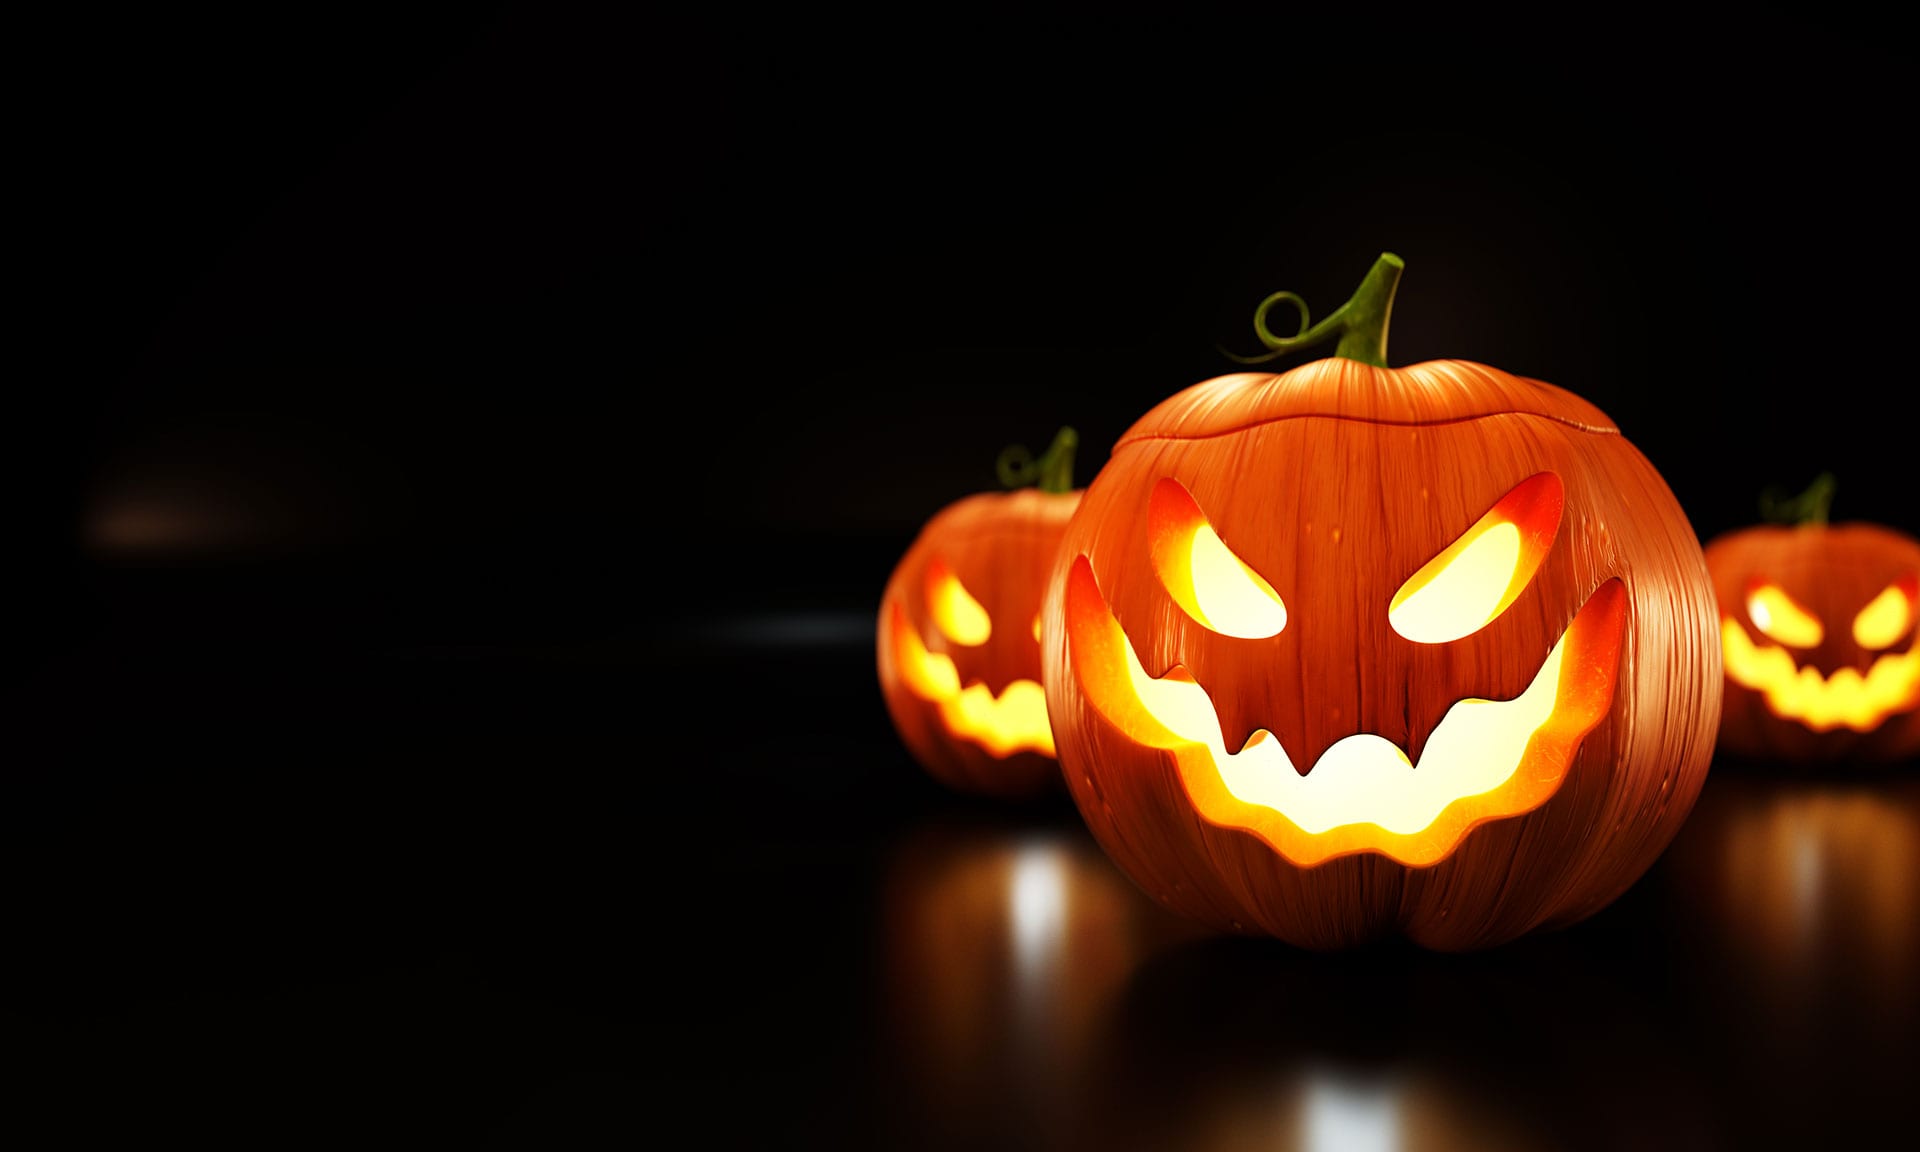 Use Landscape and Security Lighting for a Safe and Fun Halloween